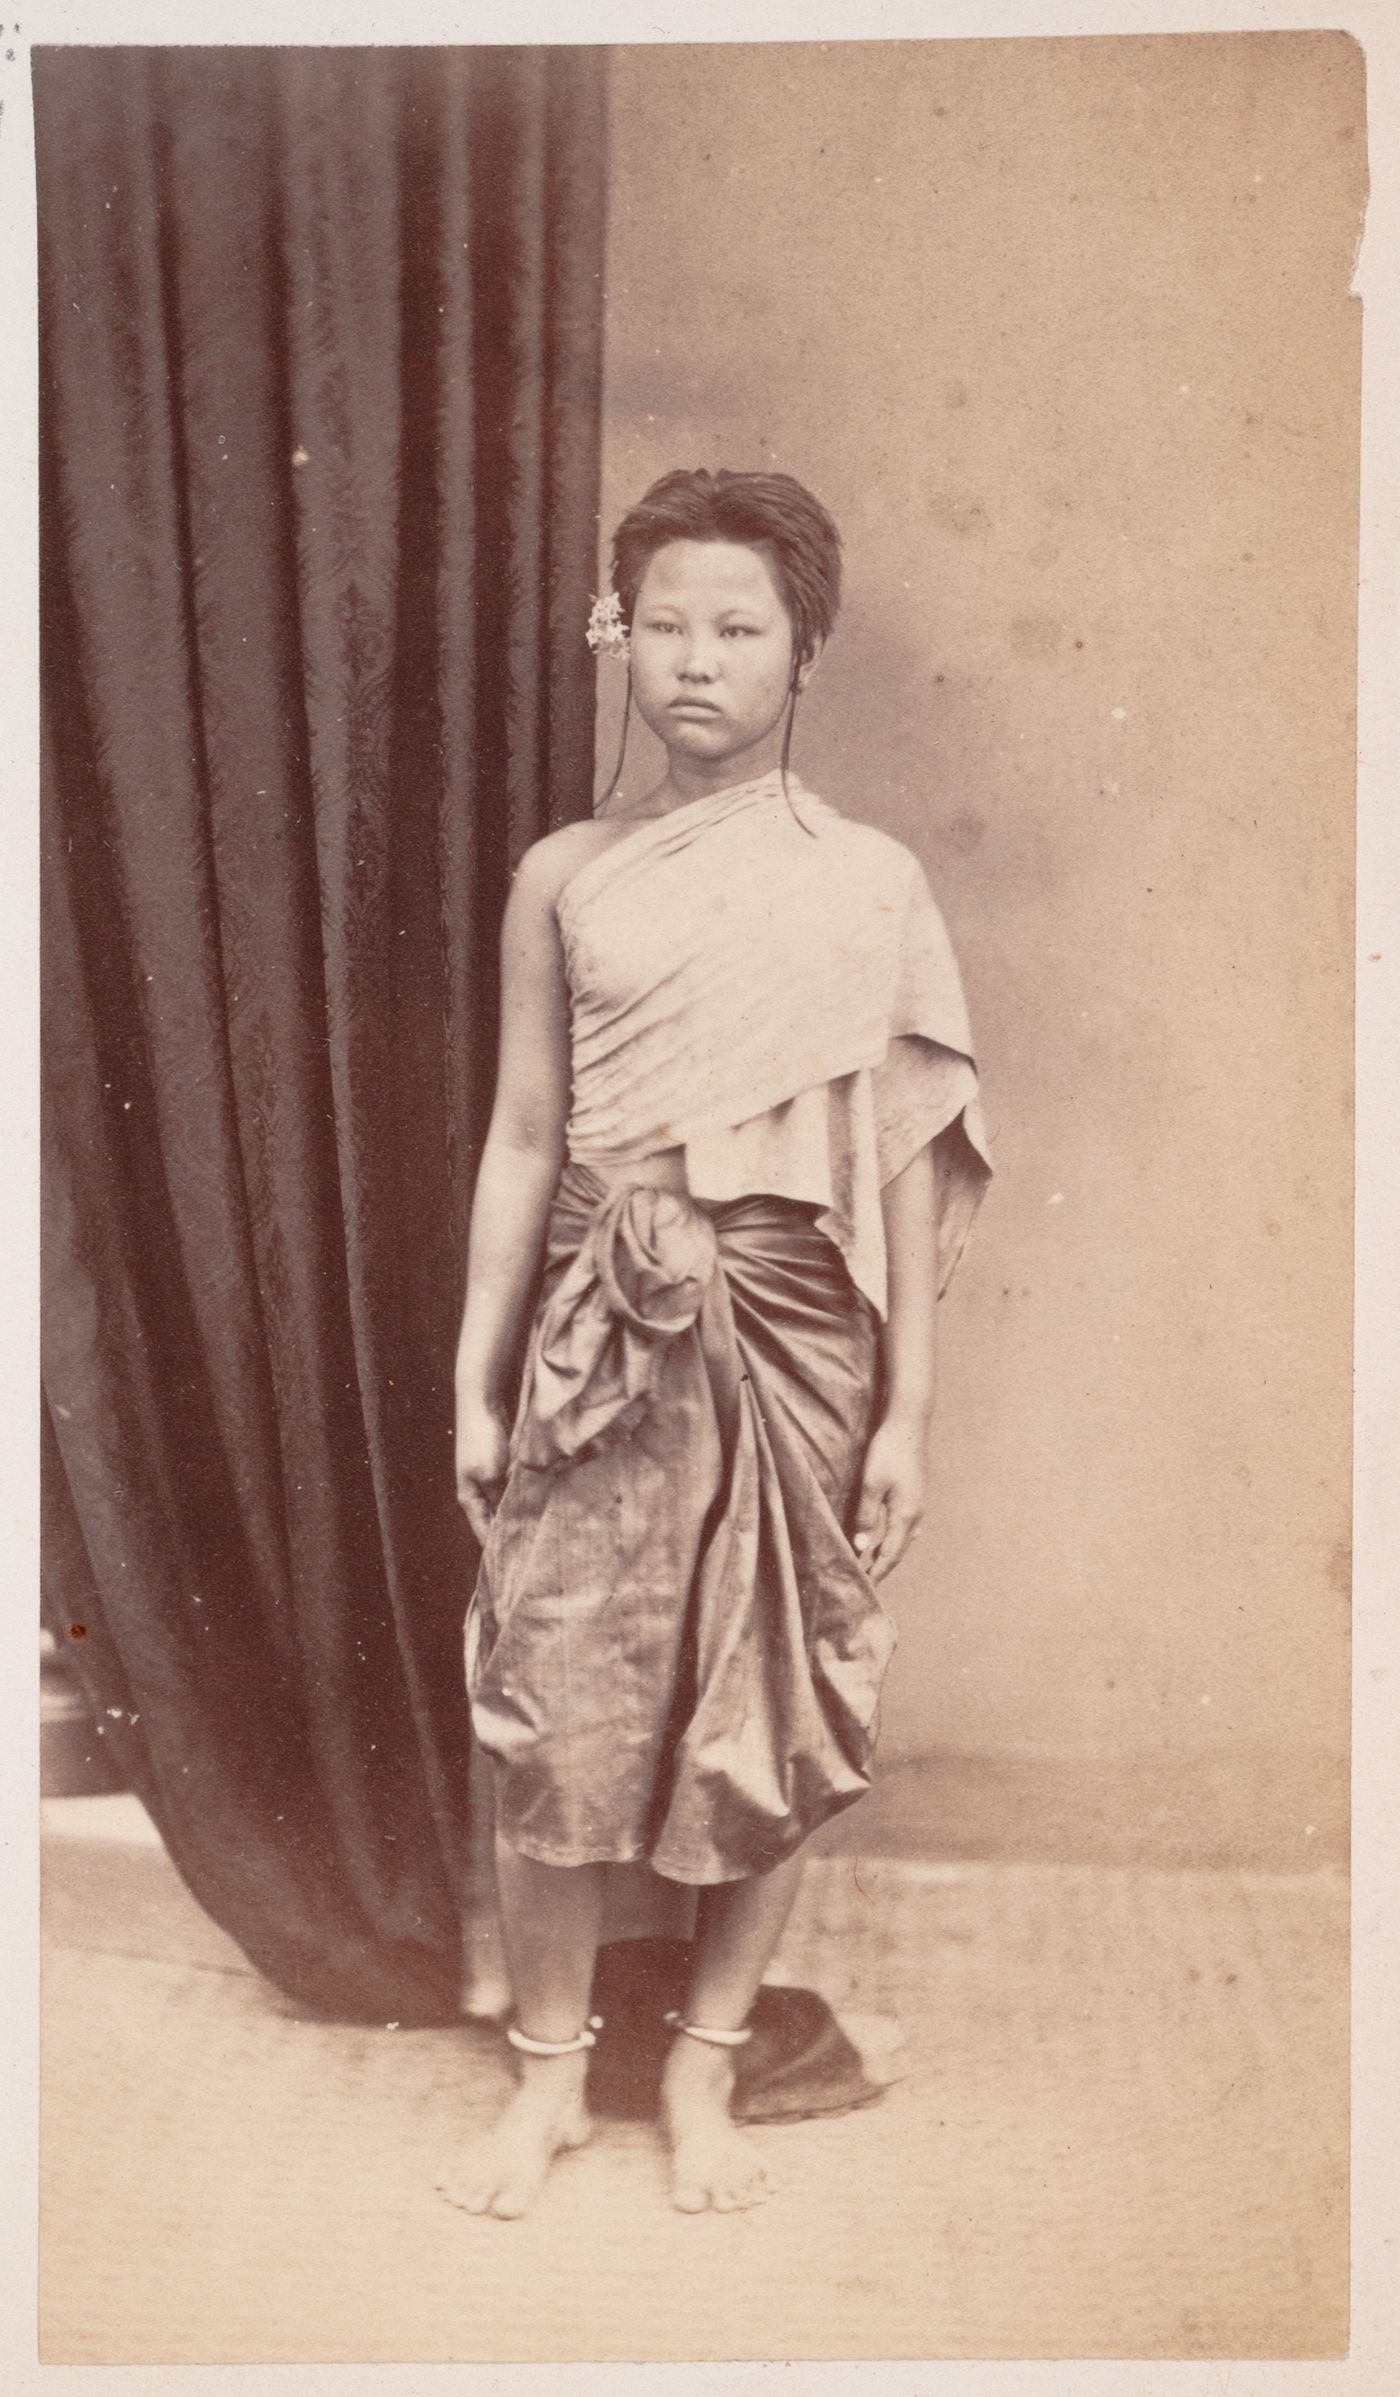 Portrait of a woman standing beside a curtain, probably in Cambodia